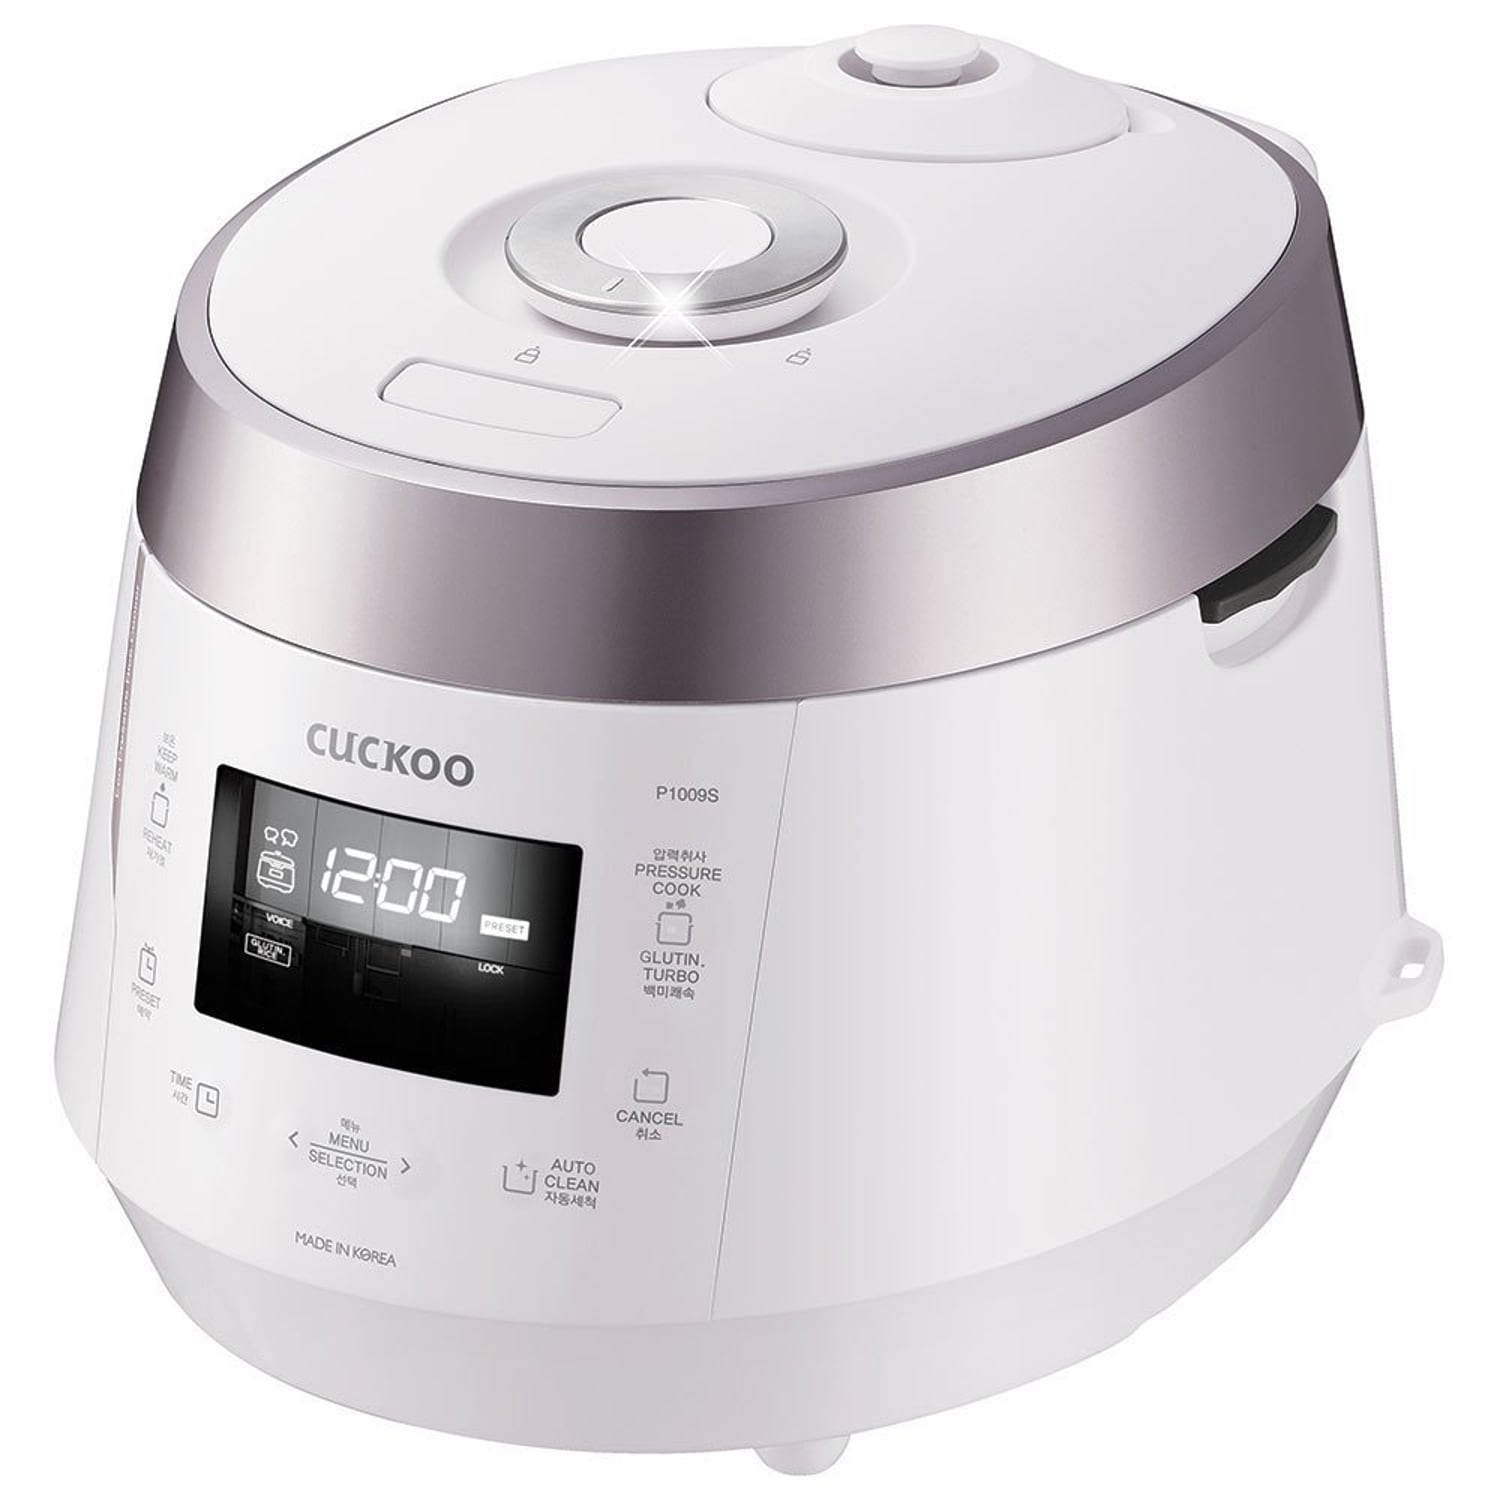 https://ak1.ostkcdn.com/images/products/10335212/Cuckoo-CRP-P1009S-10-Cup-Electric-Pressure-Rice-Cooker-120v-White-aebcac1e-eee0-479a-aa94-a9c443d9fe57.jpg